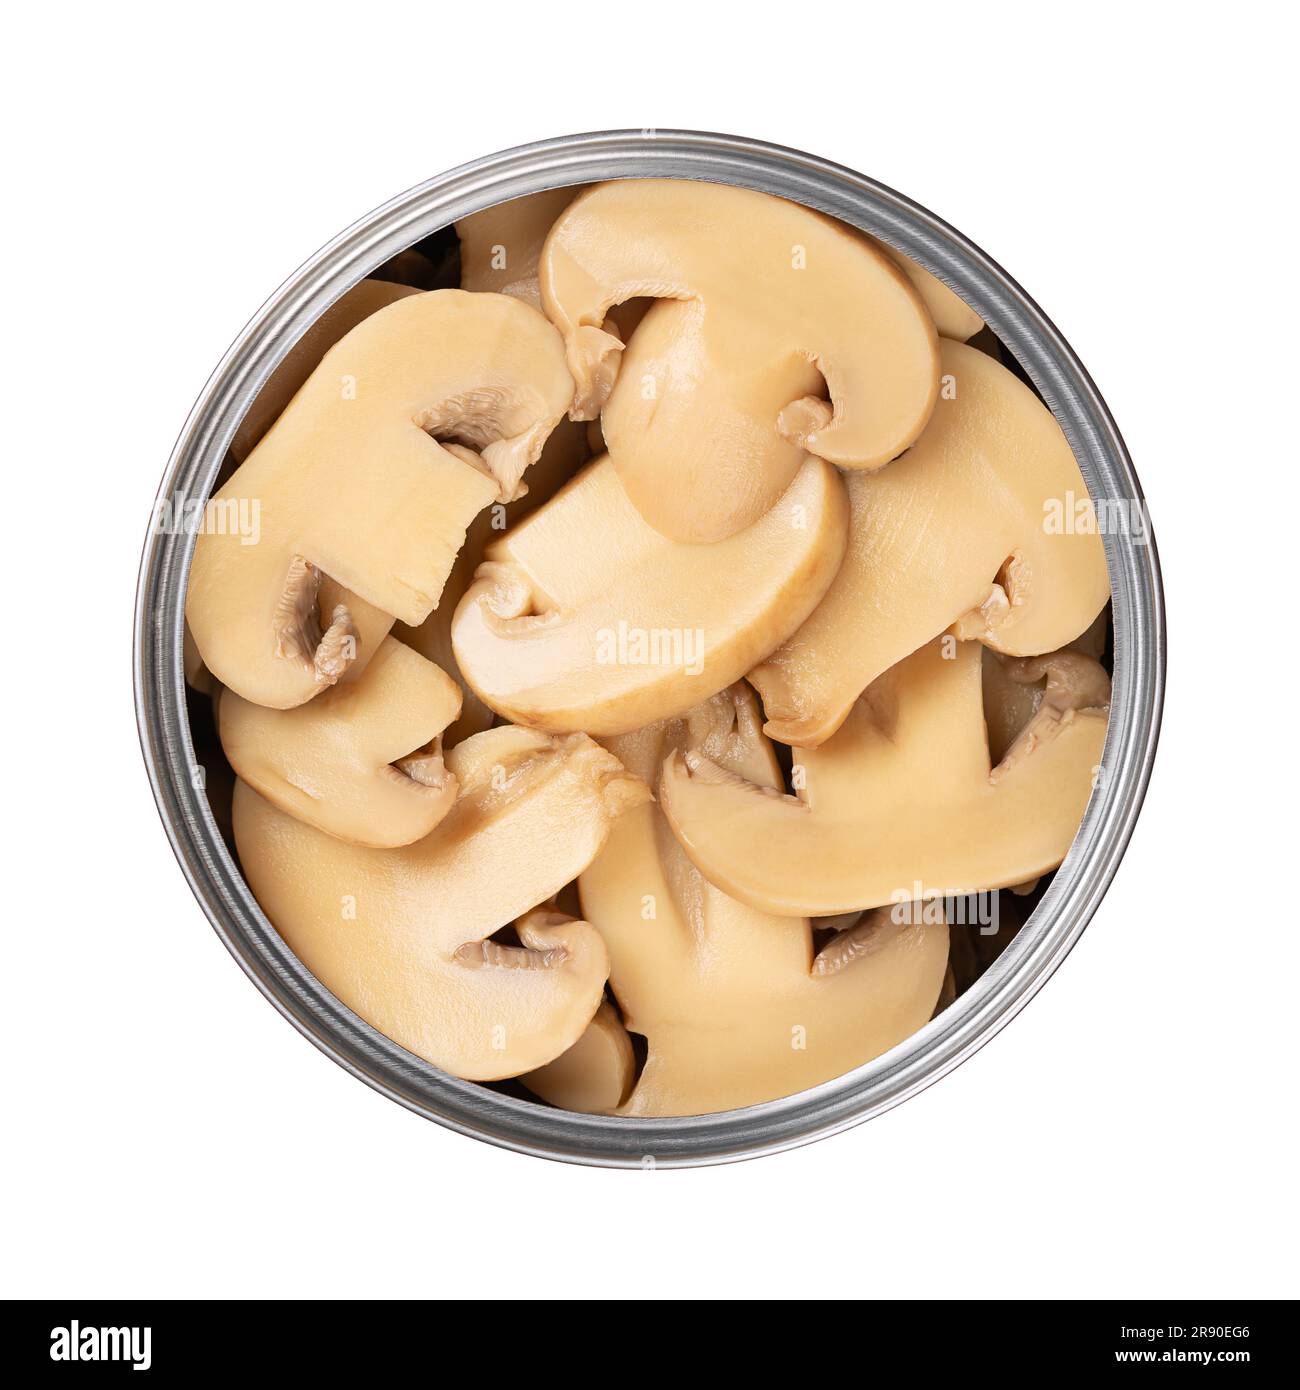 Canned sliced white champignon mushrooms, in a open tin can. Agaricus bisporus, also called common, button, cultivated or table mushroom. Close-up. Stock Photo